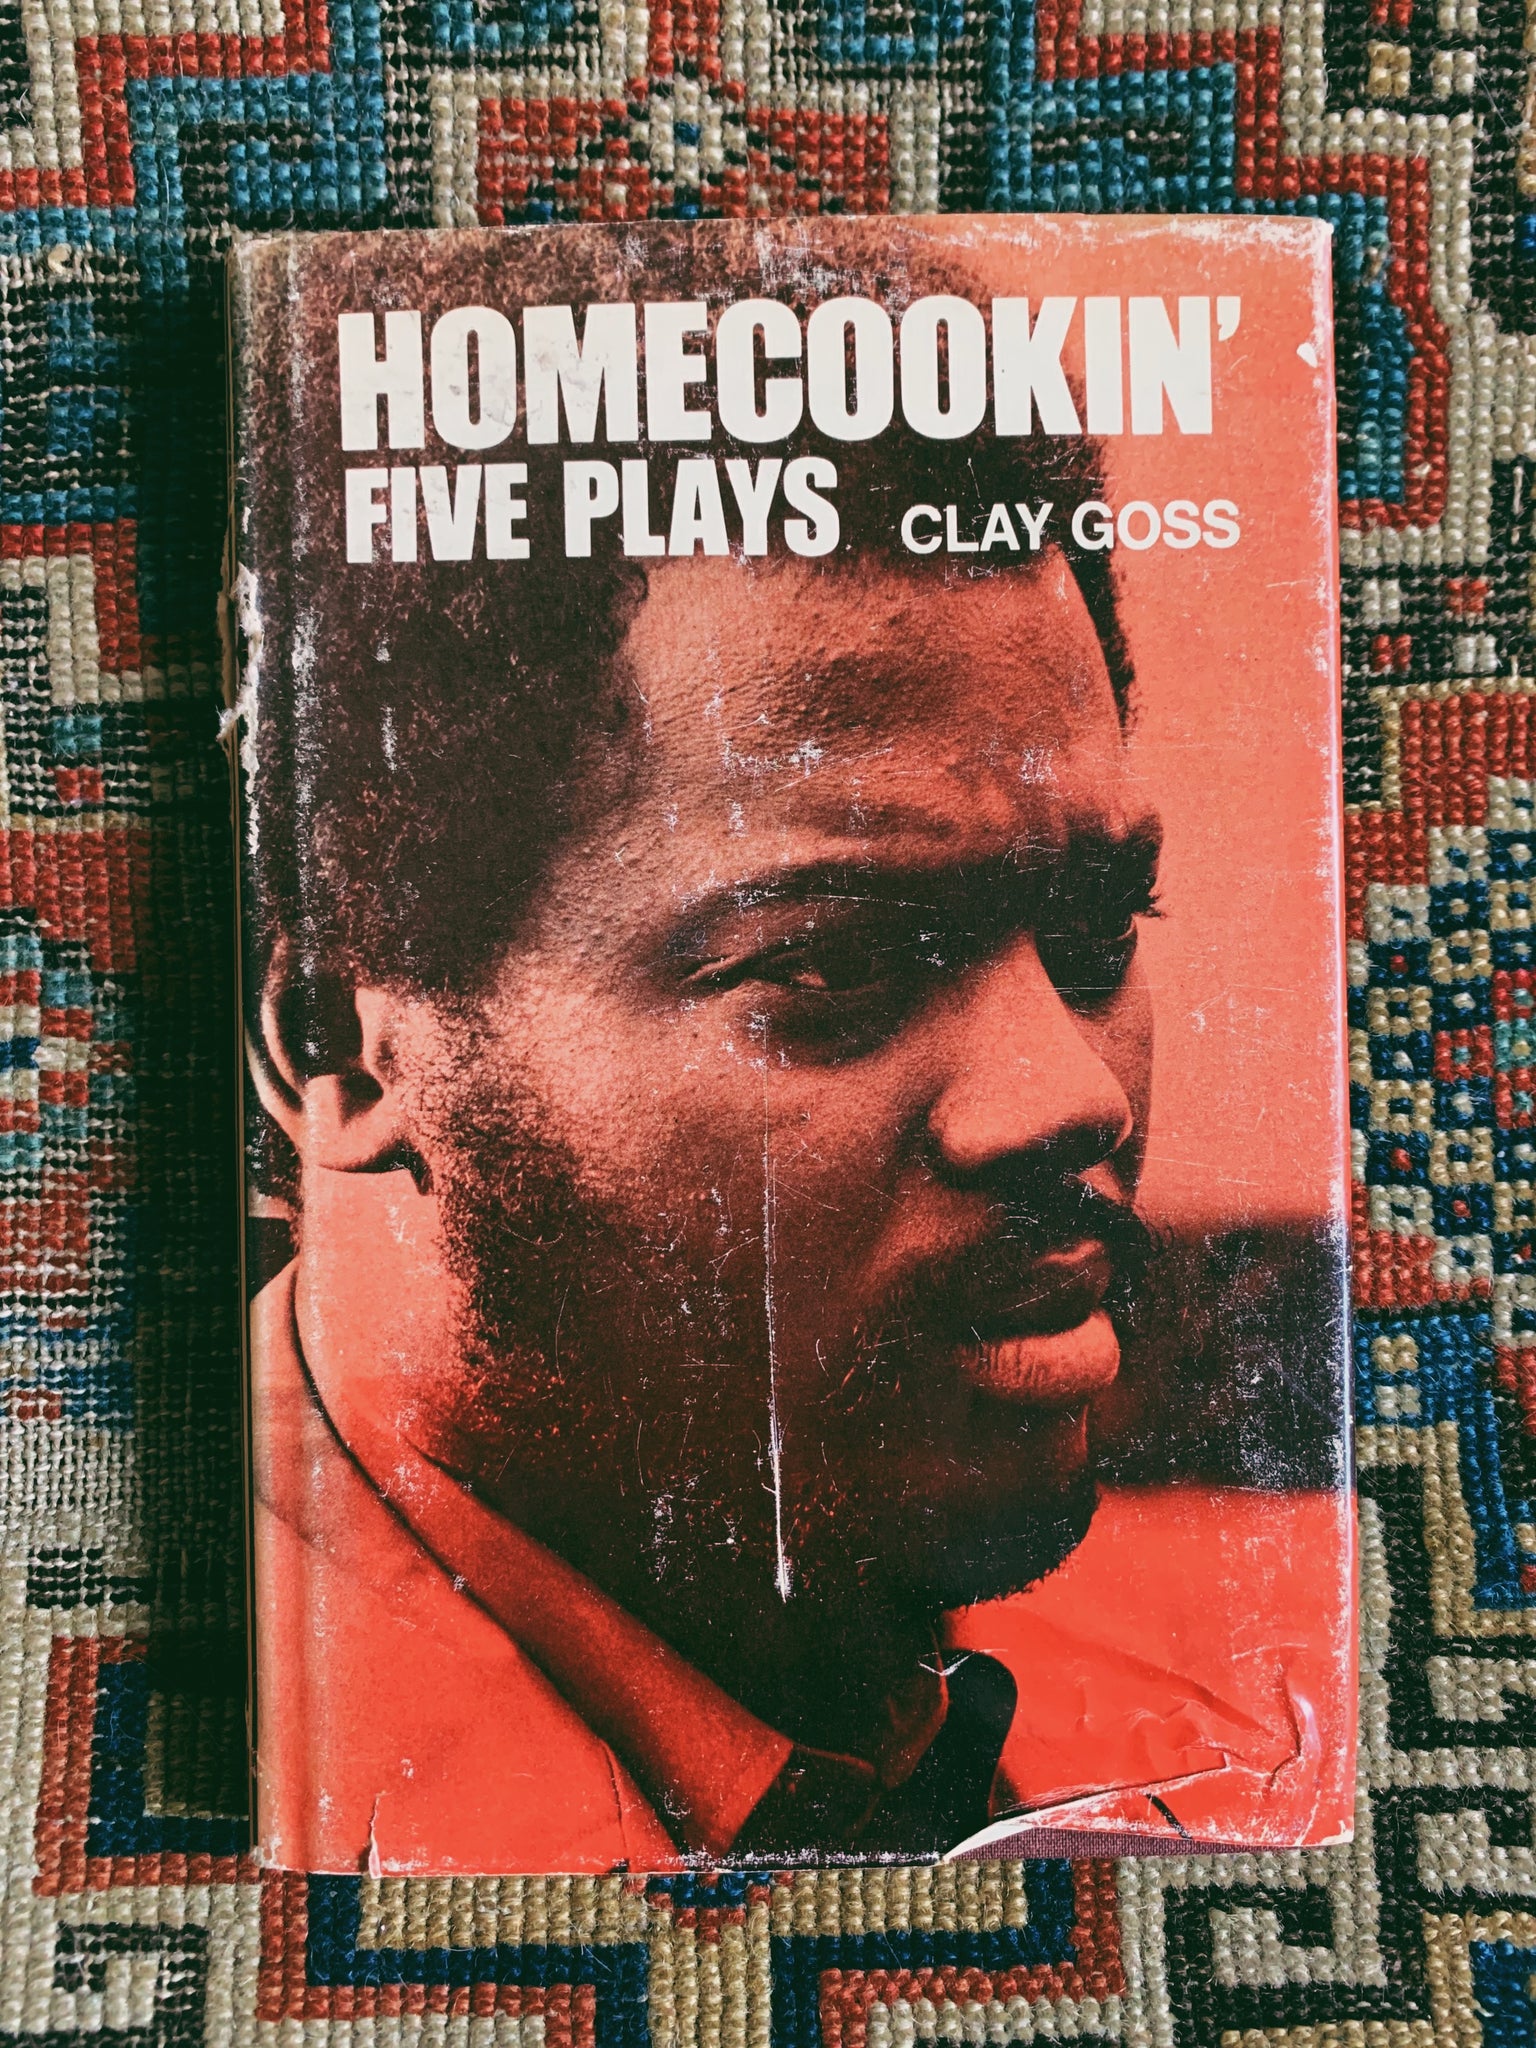 Vintage Hardcover “Homecookin’: Five Plays” By Clay Goss (1974)